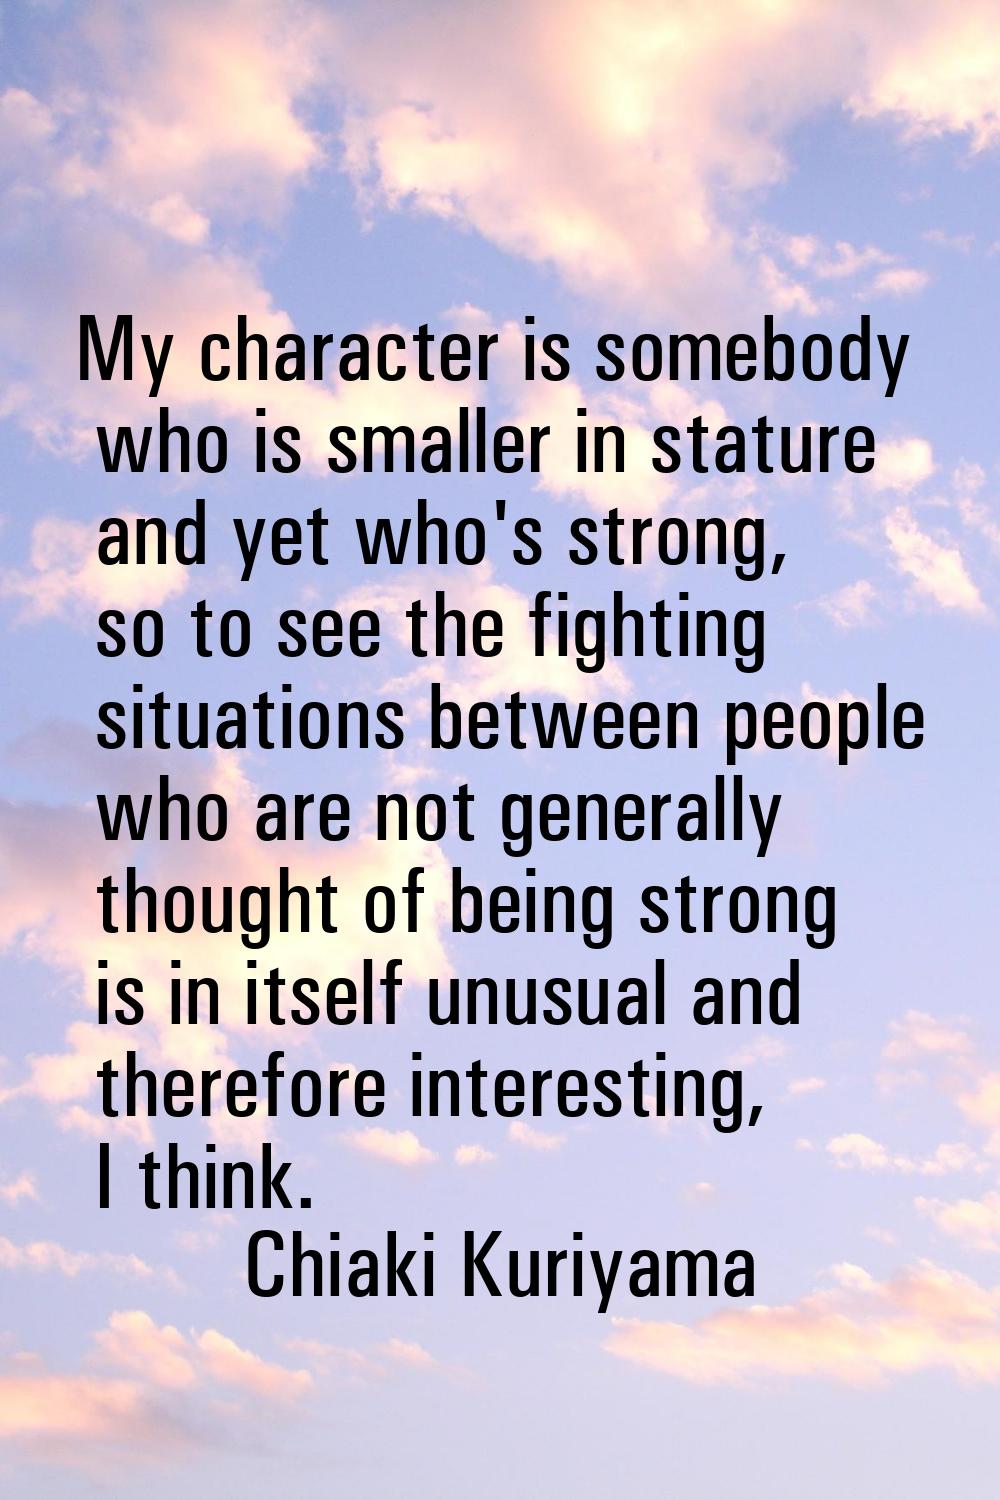 My character is somebody who is smaller in stature and yet who's strong, so to see the fighting sit